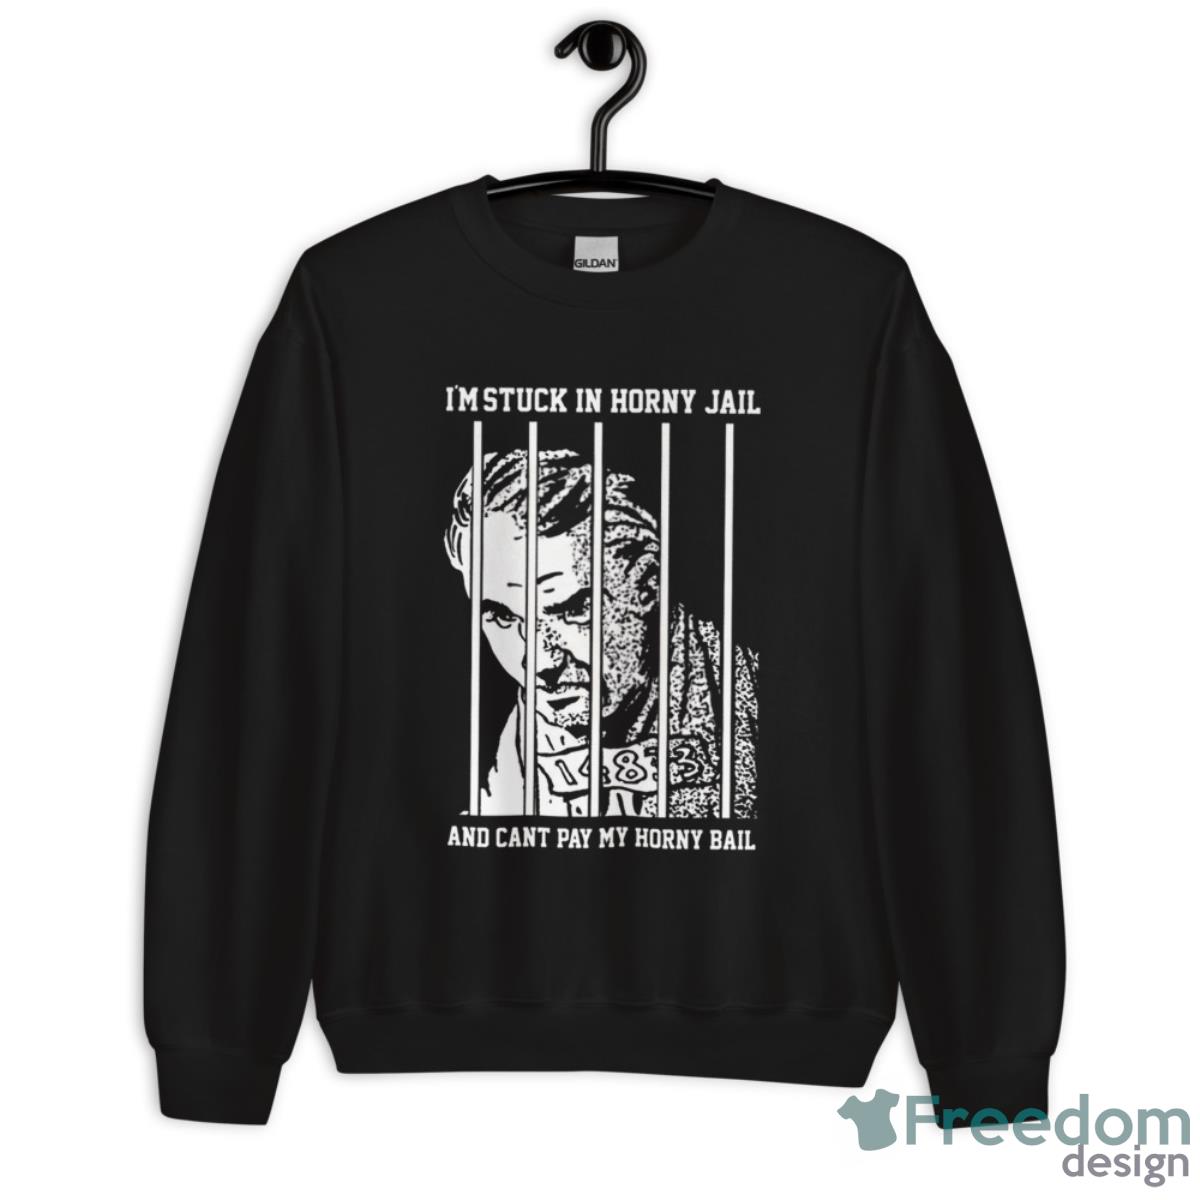 I’m Stuck In Horny Jail And Can’t Pay My Horny Bail Shirt